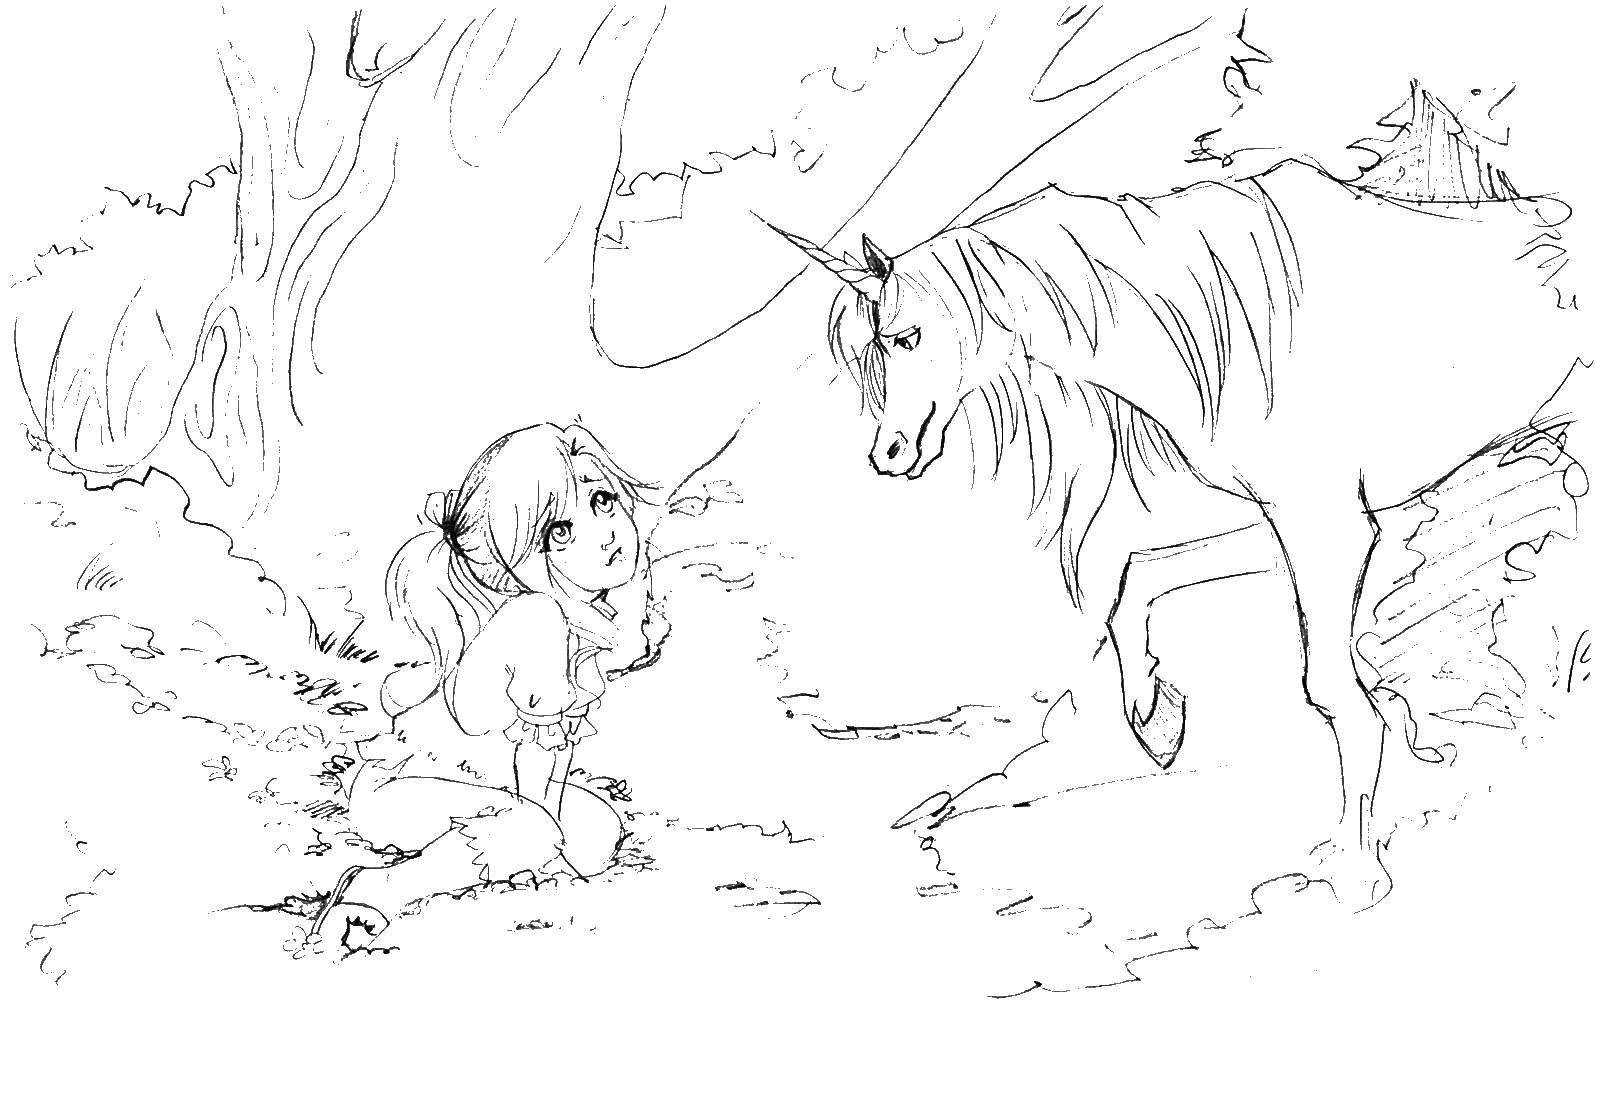 Unicorn Coloring Pages, 100 Black and White Pictures. Print ThemOnline!